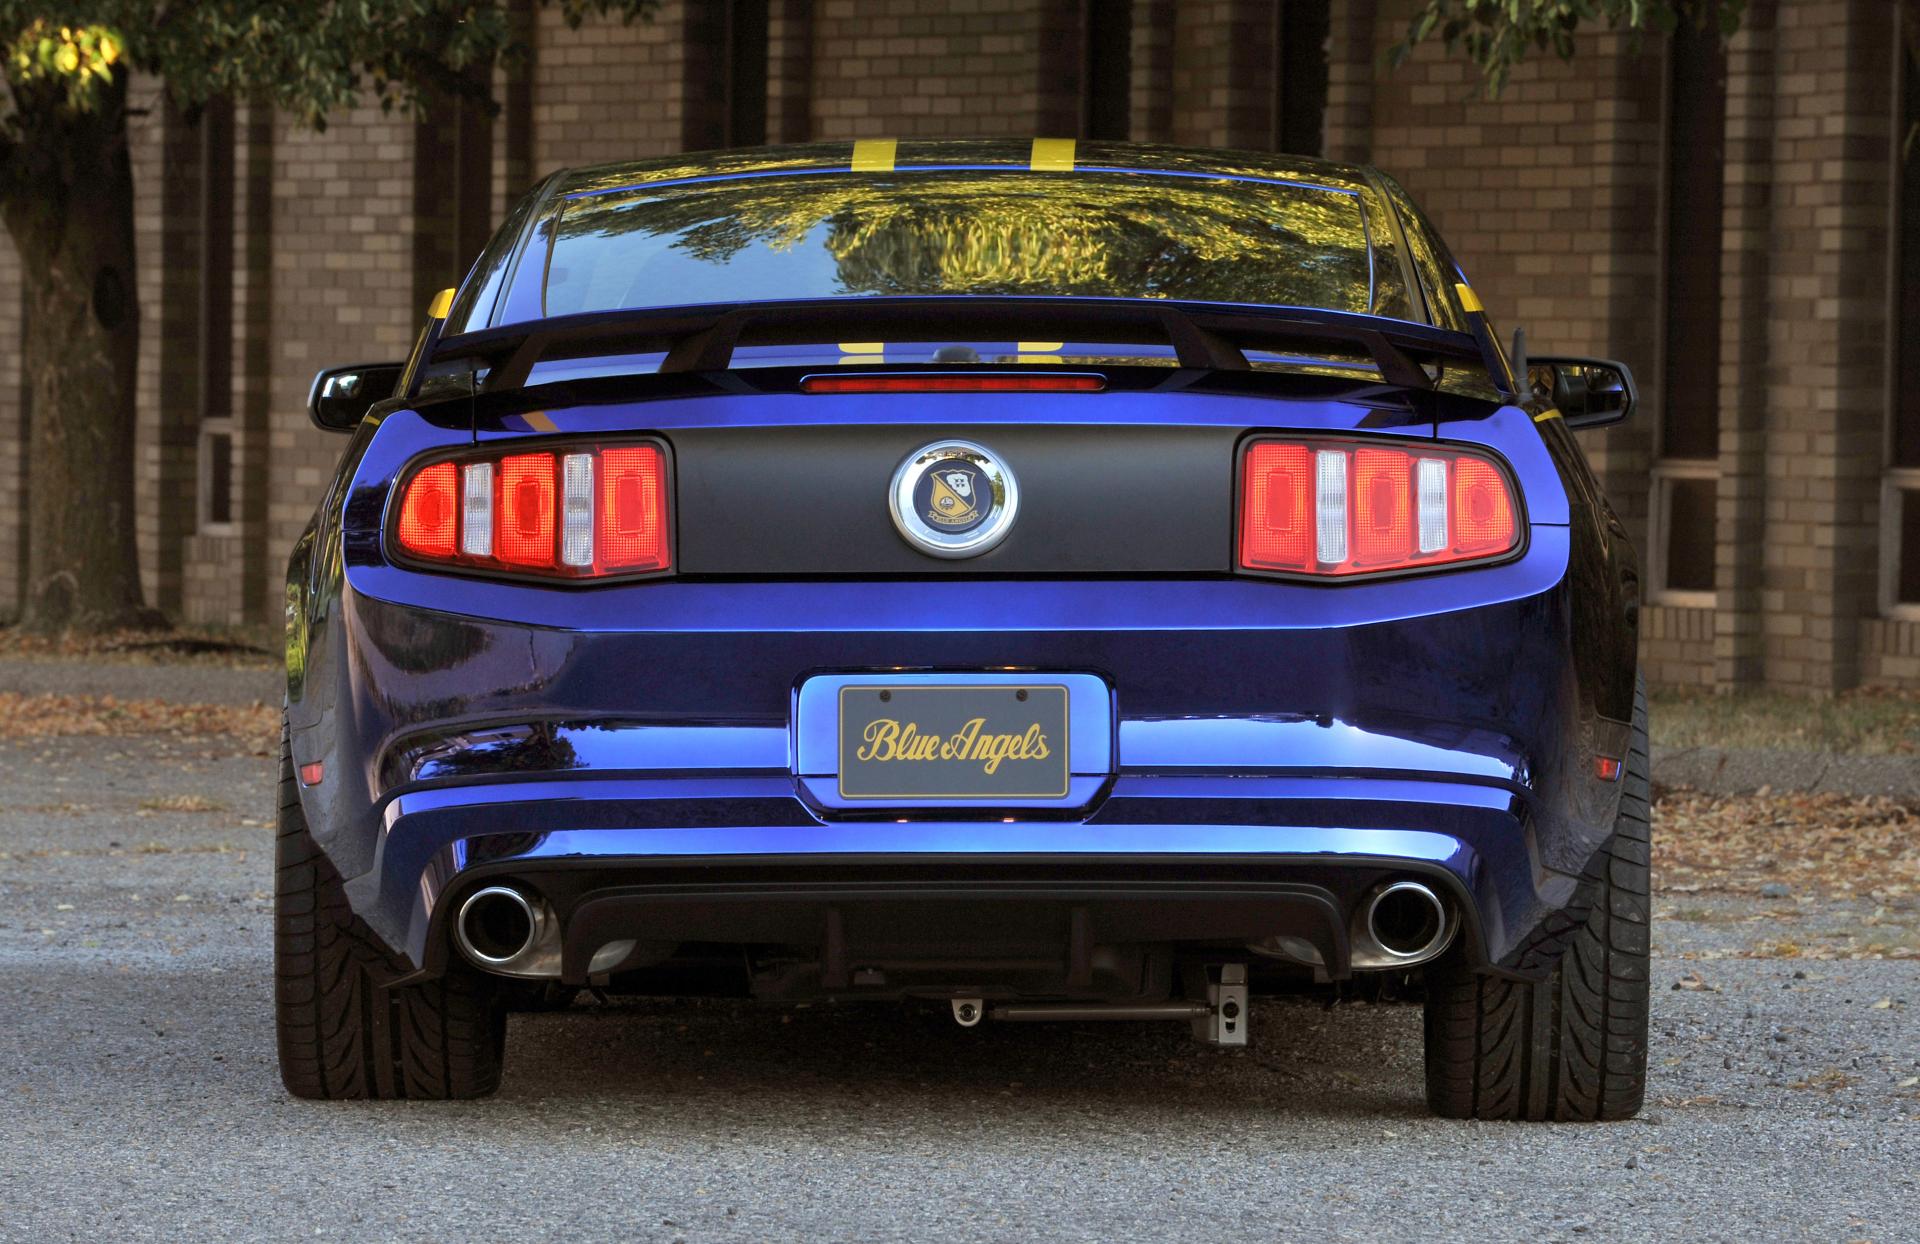 2012 Ford Mustang GT Blue Angels